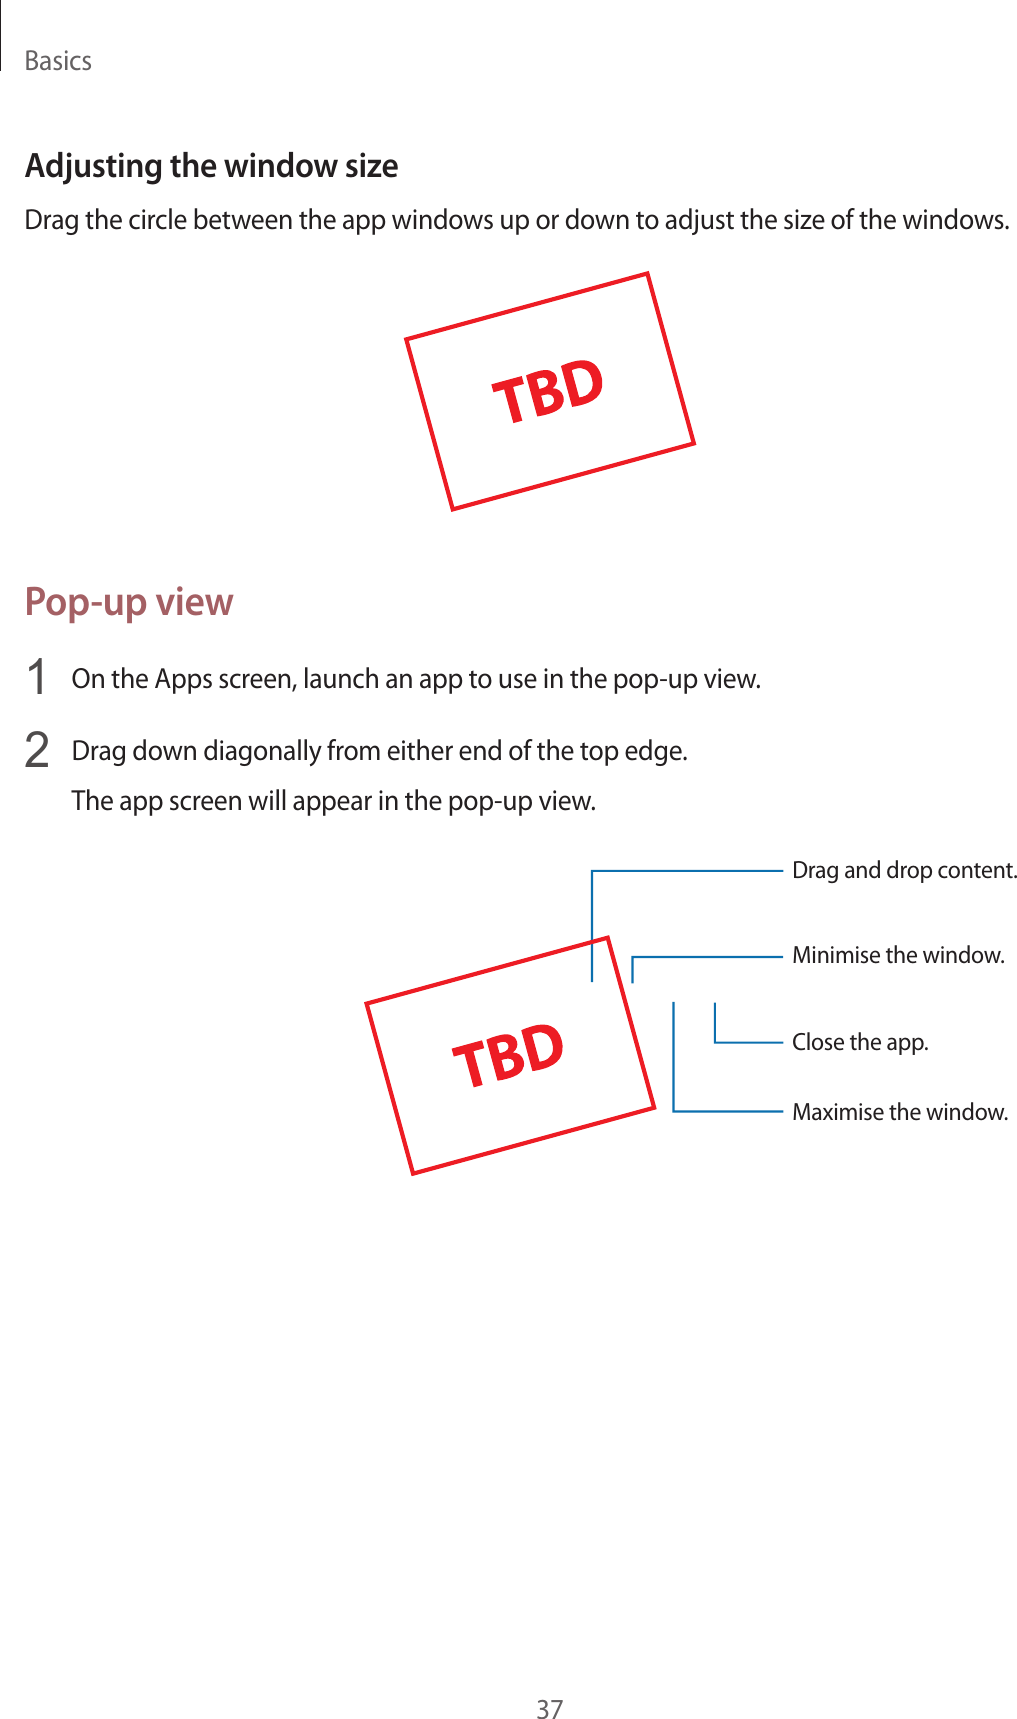 Basics37Adjusting the windo w siz eDrag the circle between the app windo w s up or down t o adjust the siz e of the window s .Pop-up view1  On the Apps screen, launch an app t o use in the pop-up view.2  Drag down diagonally fr om either end of the t op edge .The app screen will appear in the pop-up view.Minimise the window.Close the app .Maximise the window.Drag and drop c ont ent.